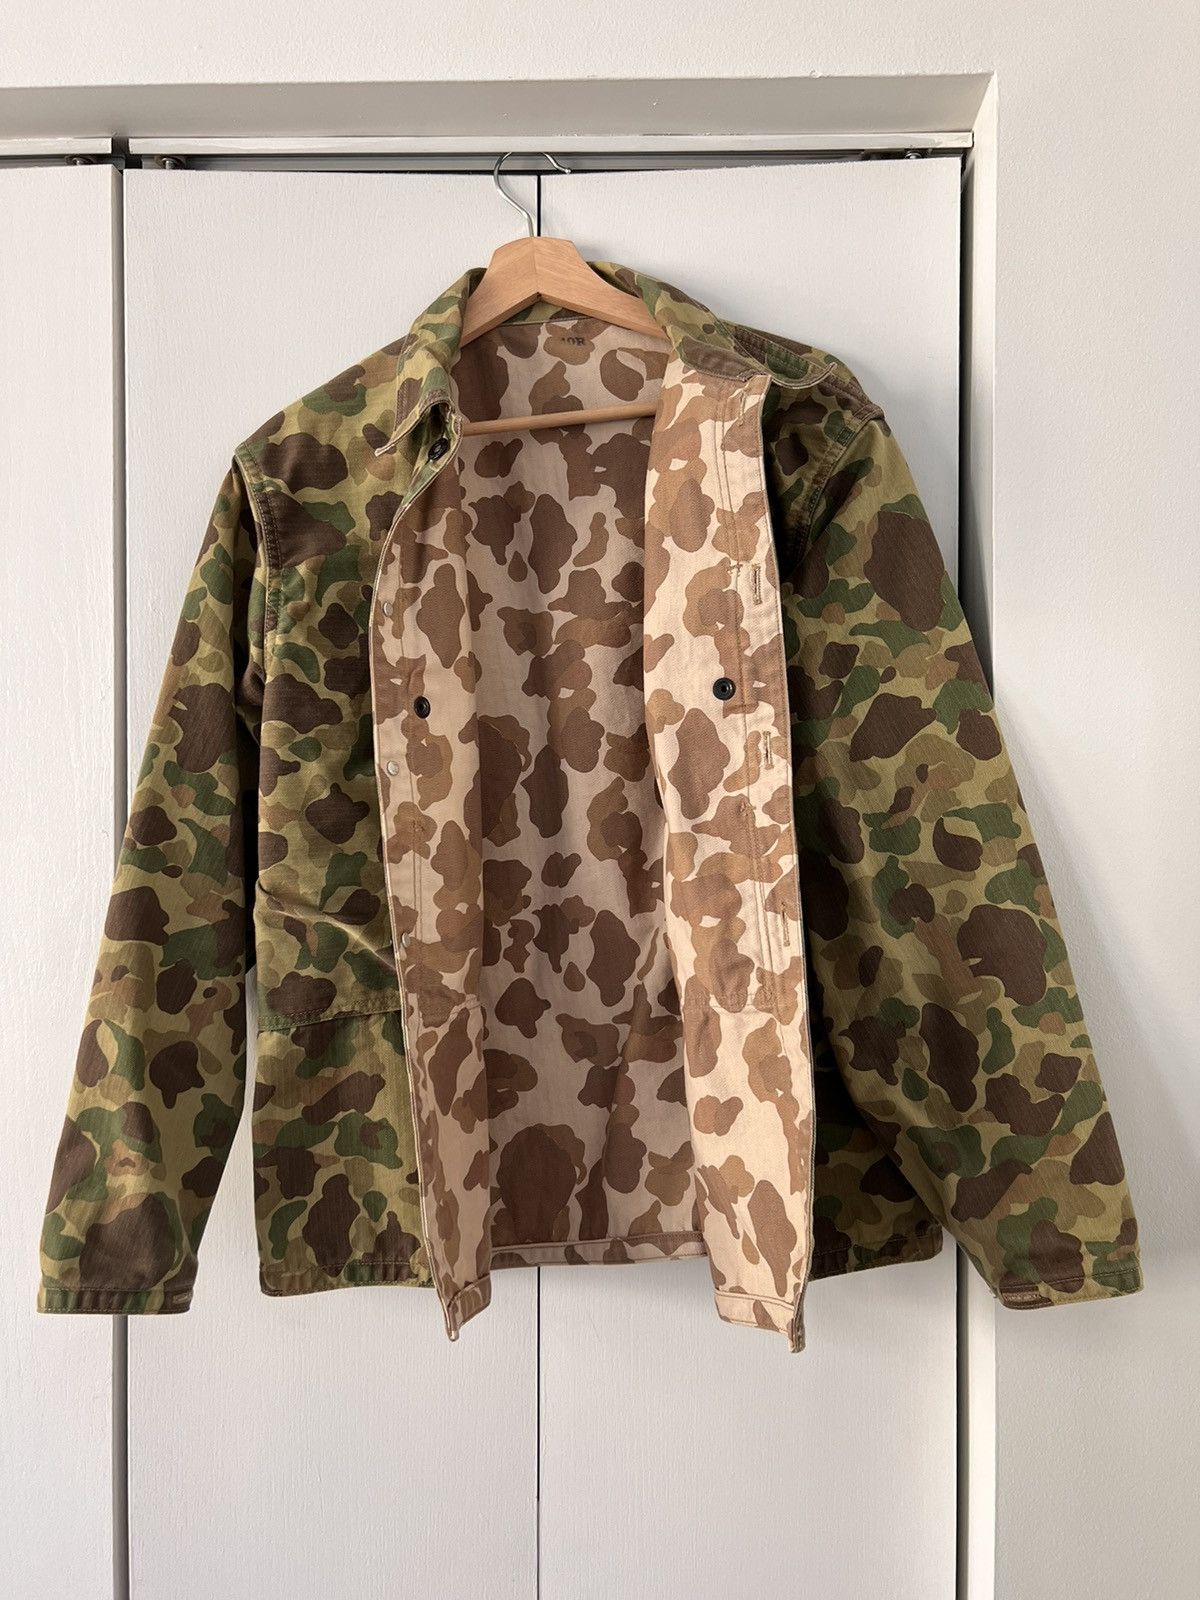 The Real McCoy's The REAL McCOY’s P1944 Frogskin Camo Jacket Size US M / EU 48-50 / 2 - 4 Thumbnail